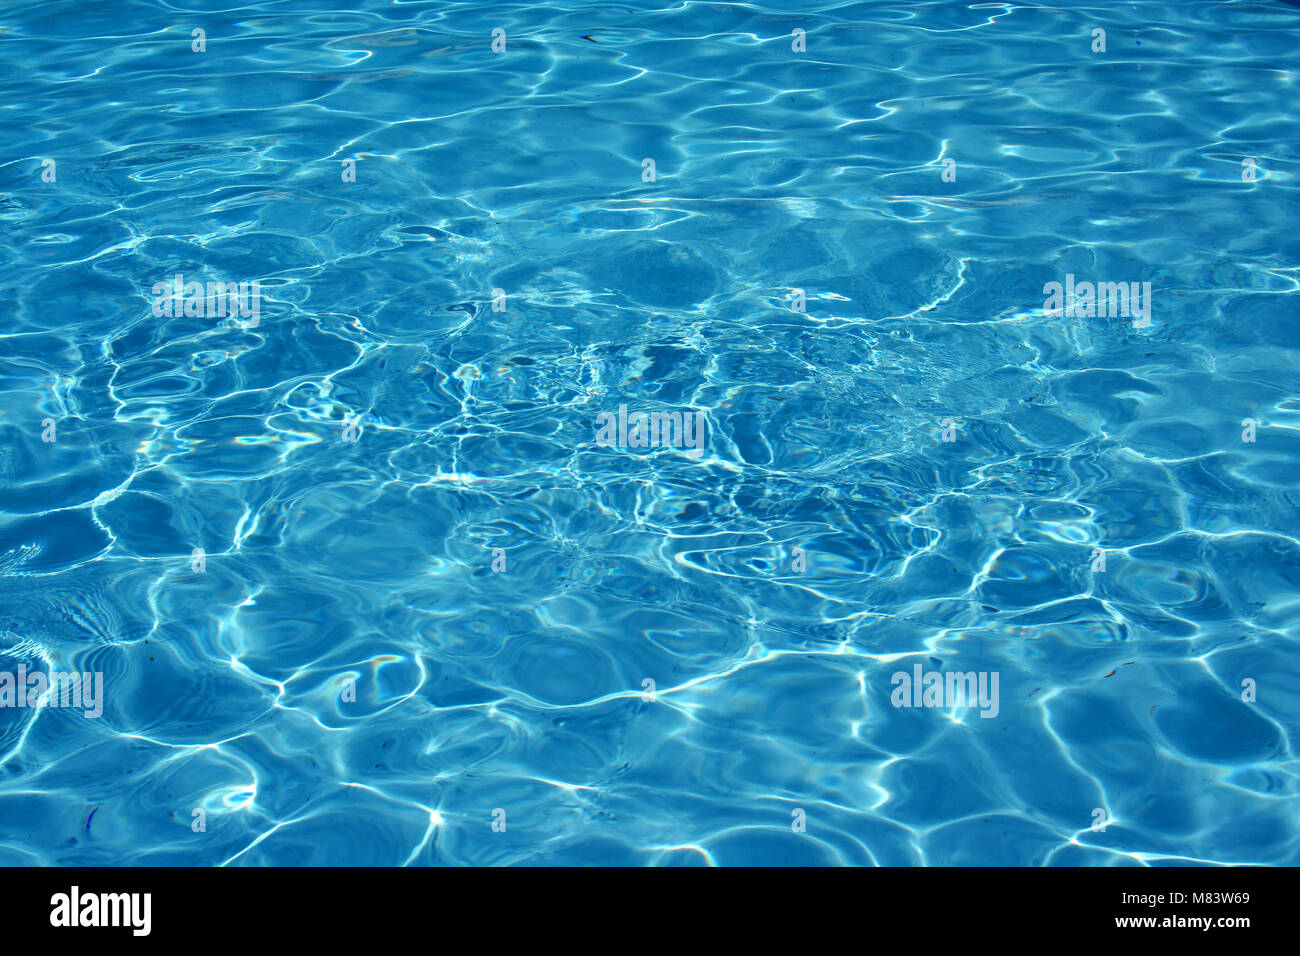 an image of a Swimming pool water Stock Photo